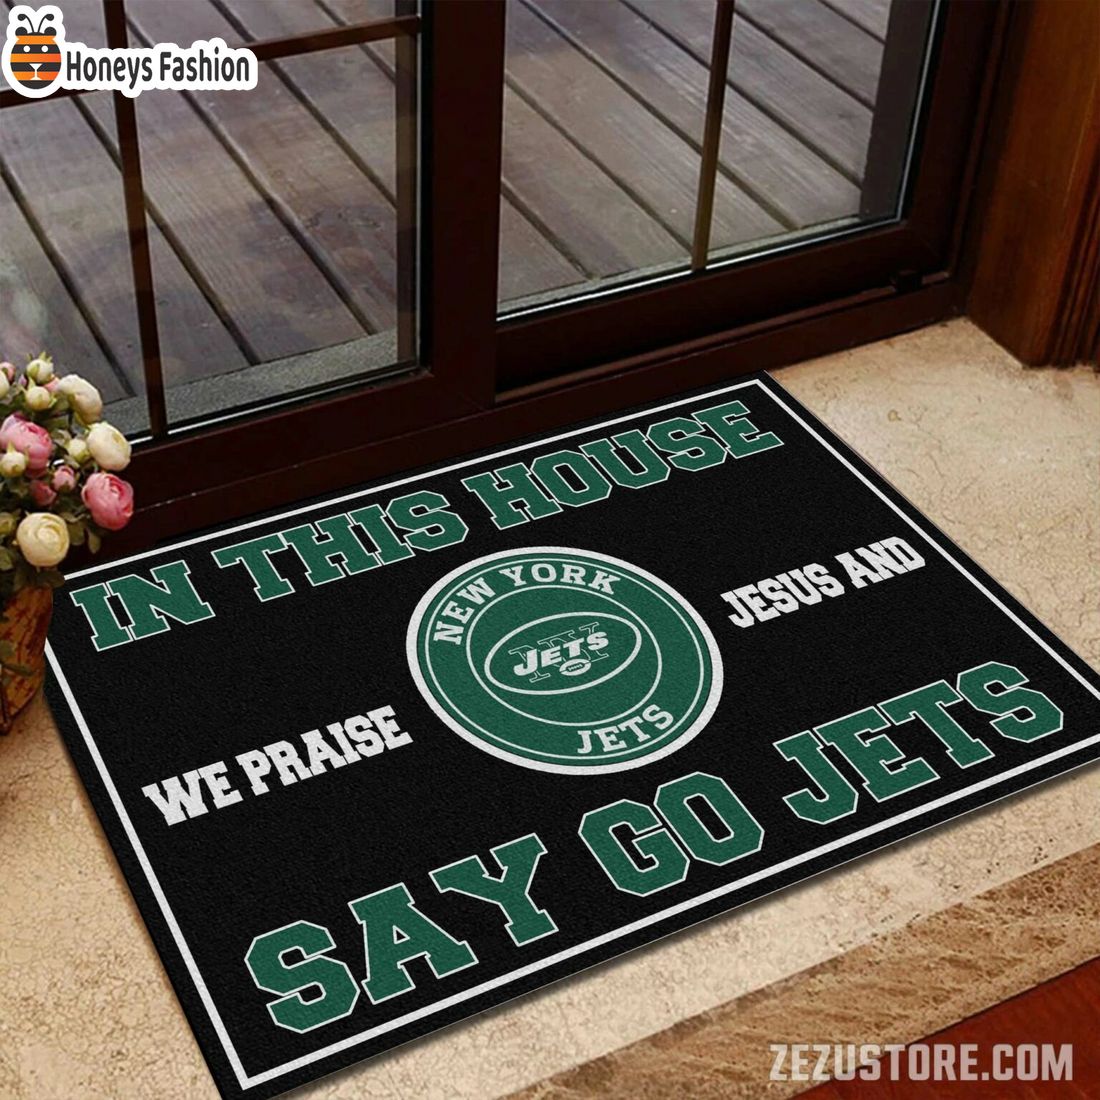 In this house we praise jesus and say go Jets doormat